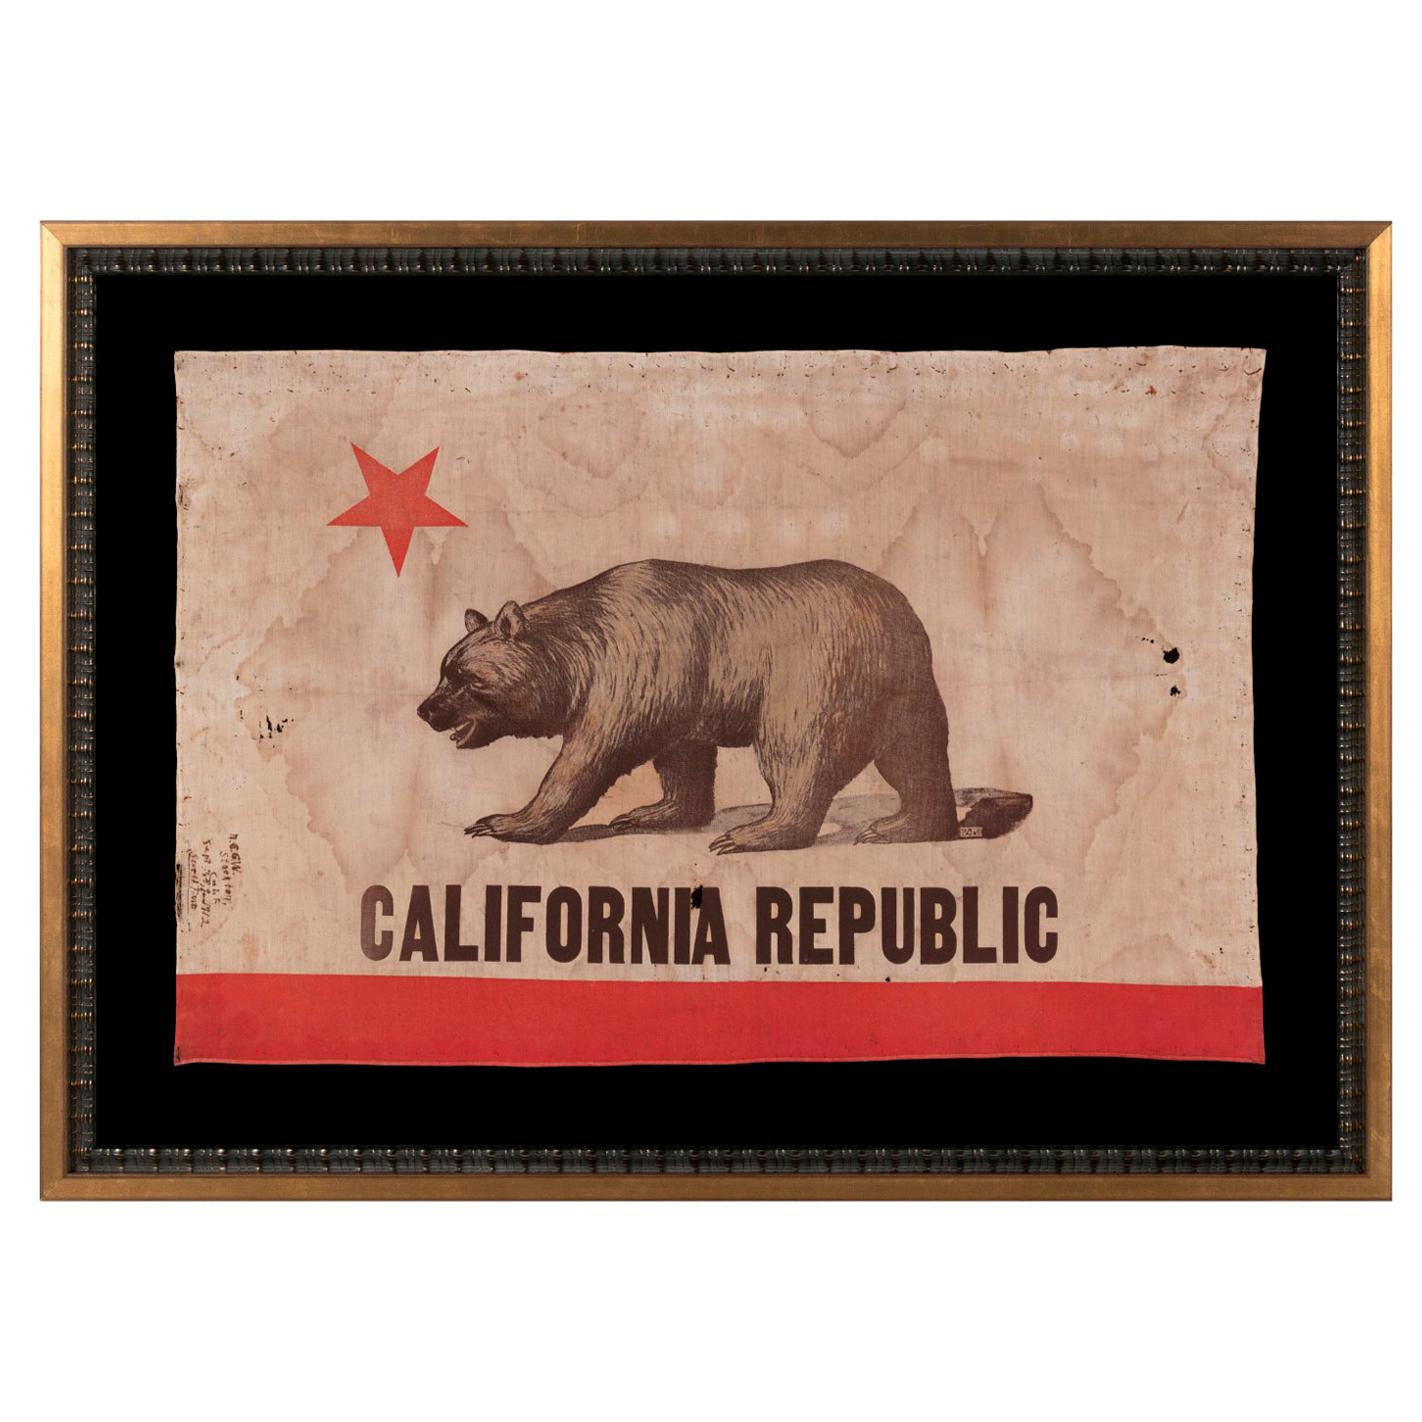 California "Bear" State Flag with 1912 Inscription Signed "D & M Co"